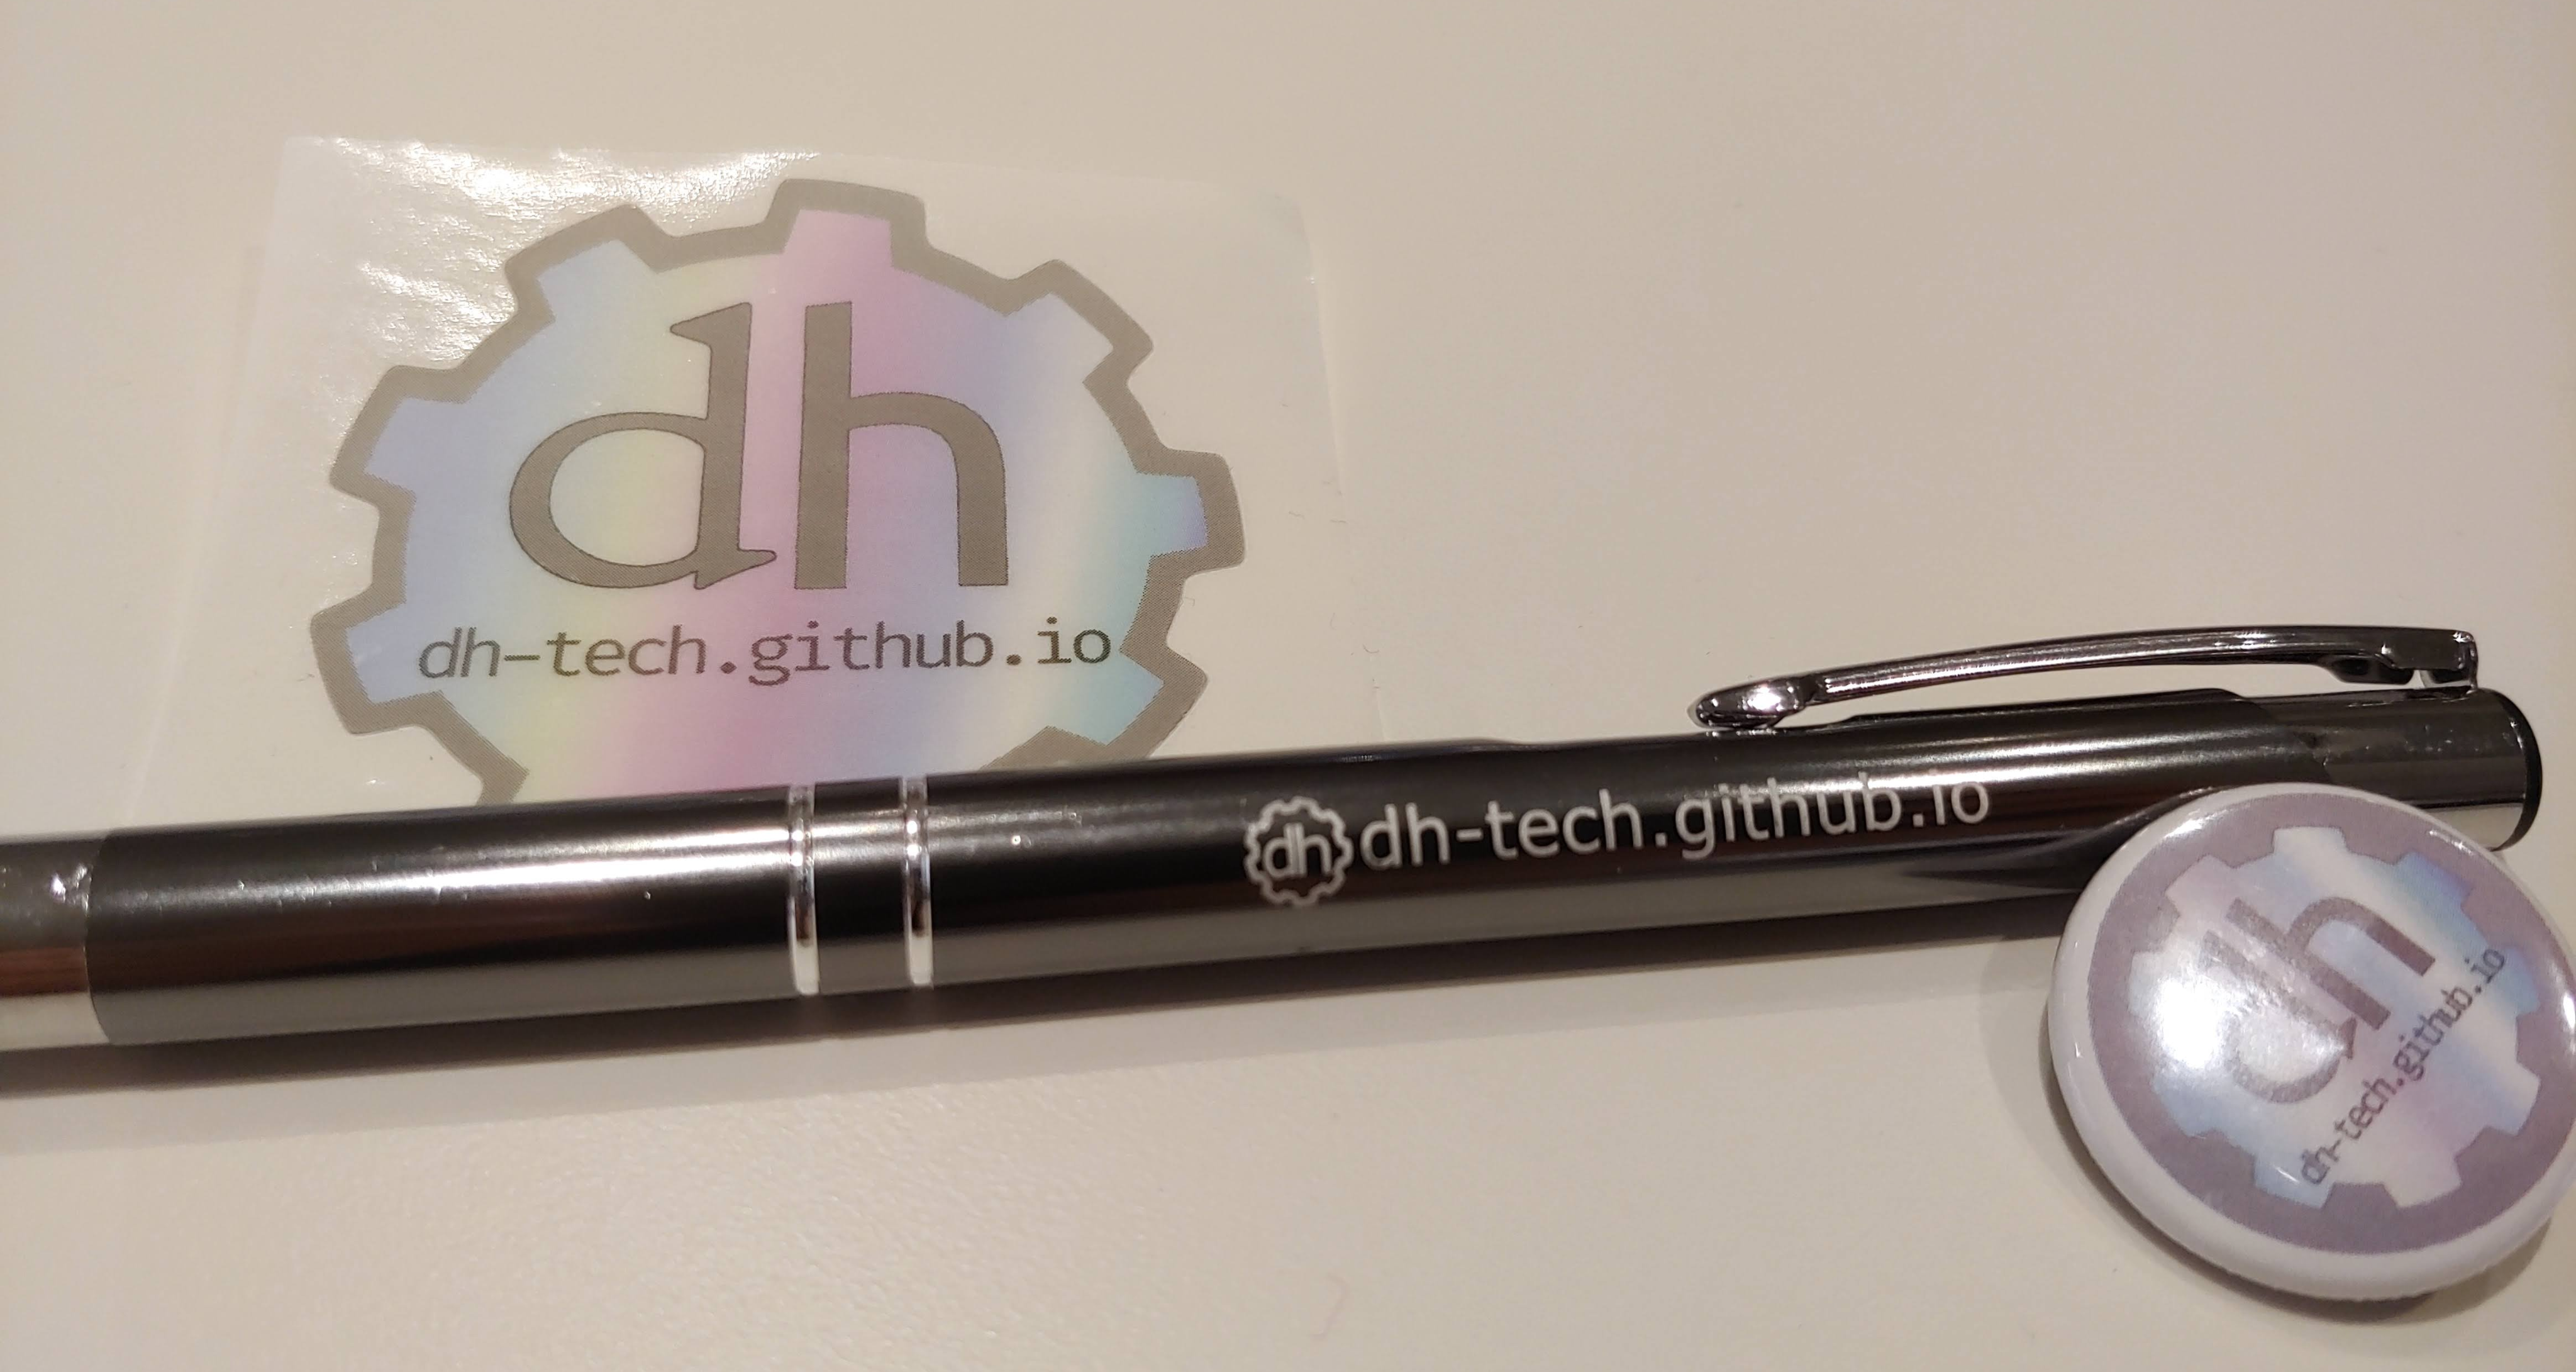 photo of a sticker, pen, and pin with variations of new DHtech logo